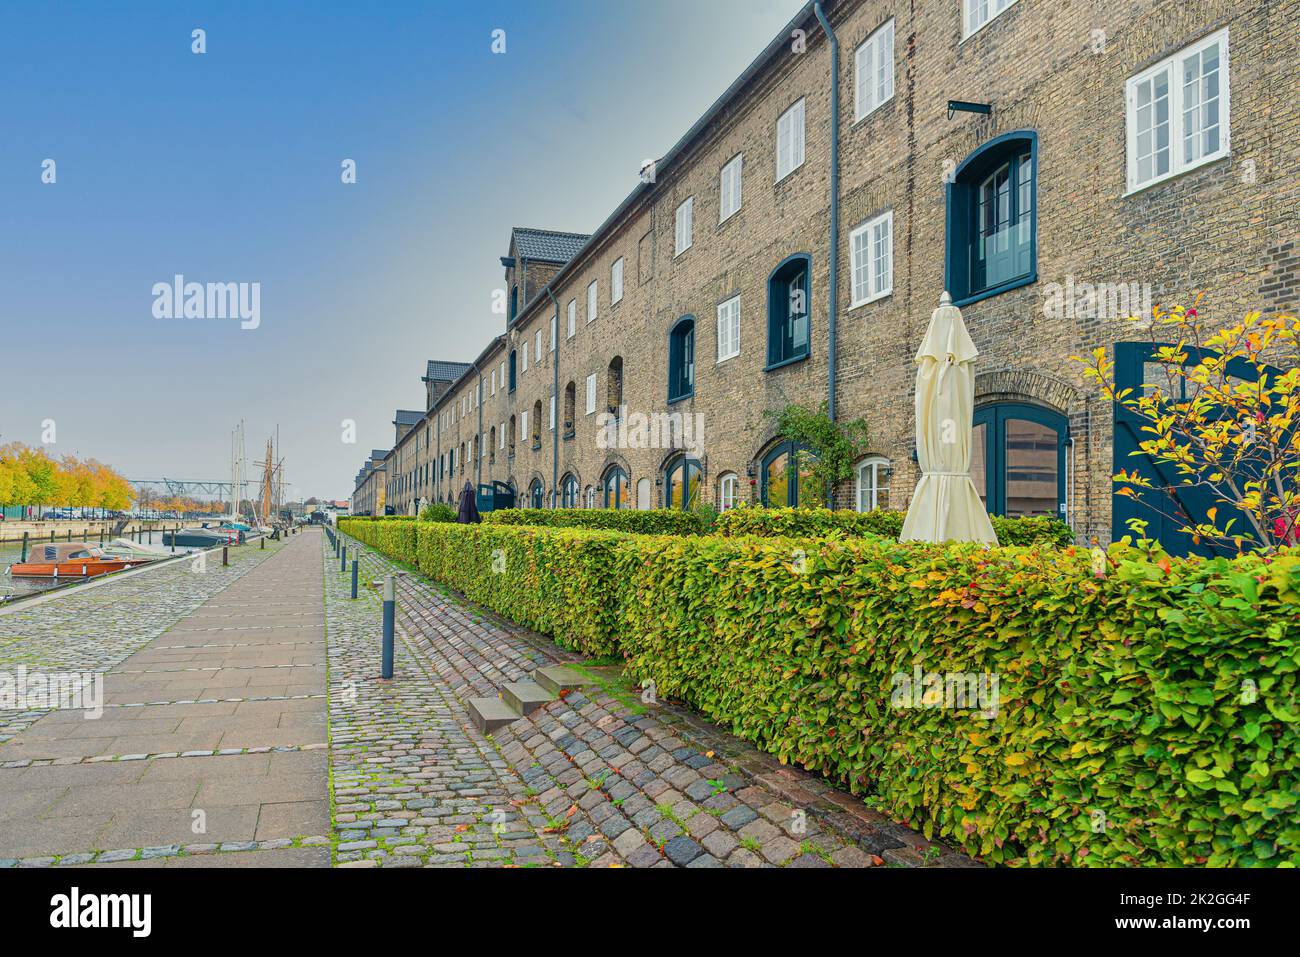 Many three-story buildings made of gray bricks on a street with a stone pavement near the river channel on the neighbourhood Christianshavn.Copenhagen, Denmark Stock Photo